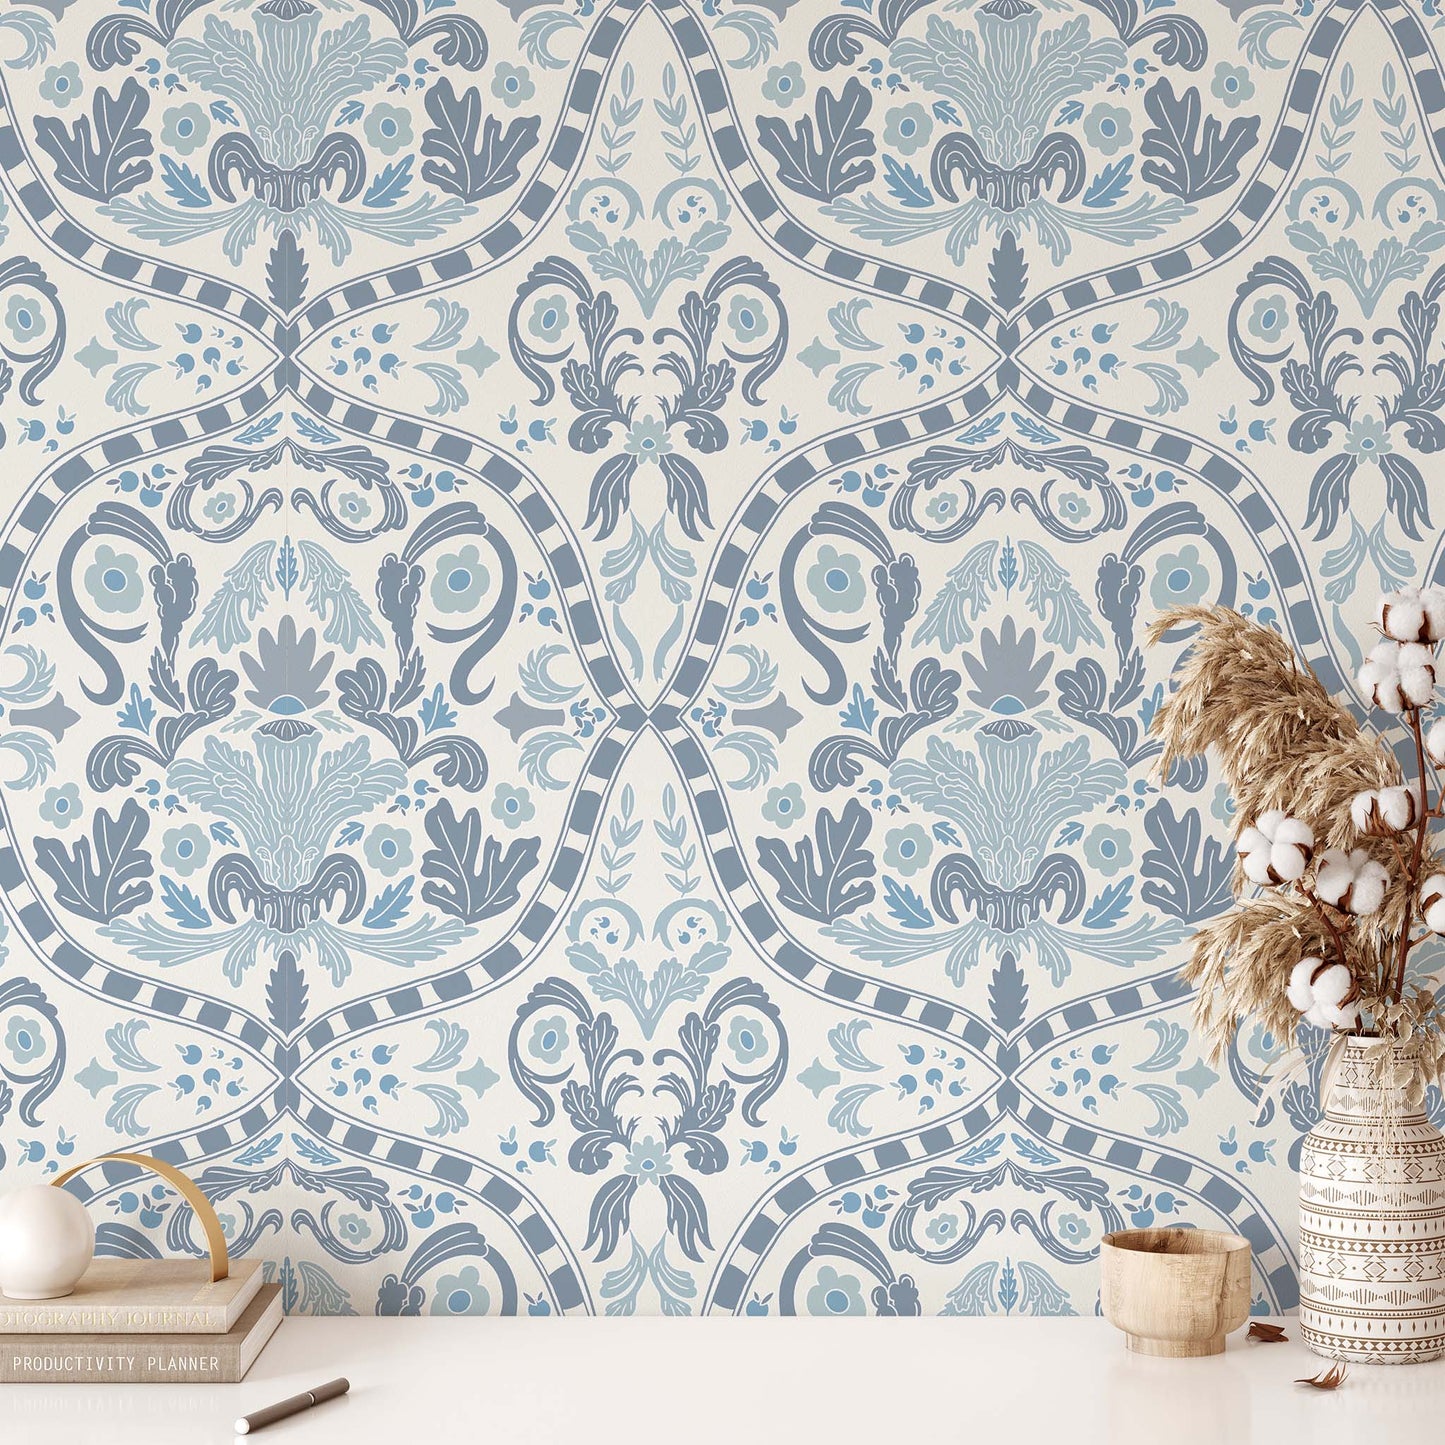 Transform any room into a luxurious retreat with our Italian Villa Wallpaper in Cottage Blue. The unique geometric design adds a touch of sophistication shown in a full size image.